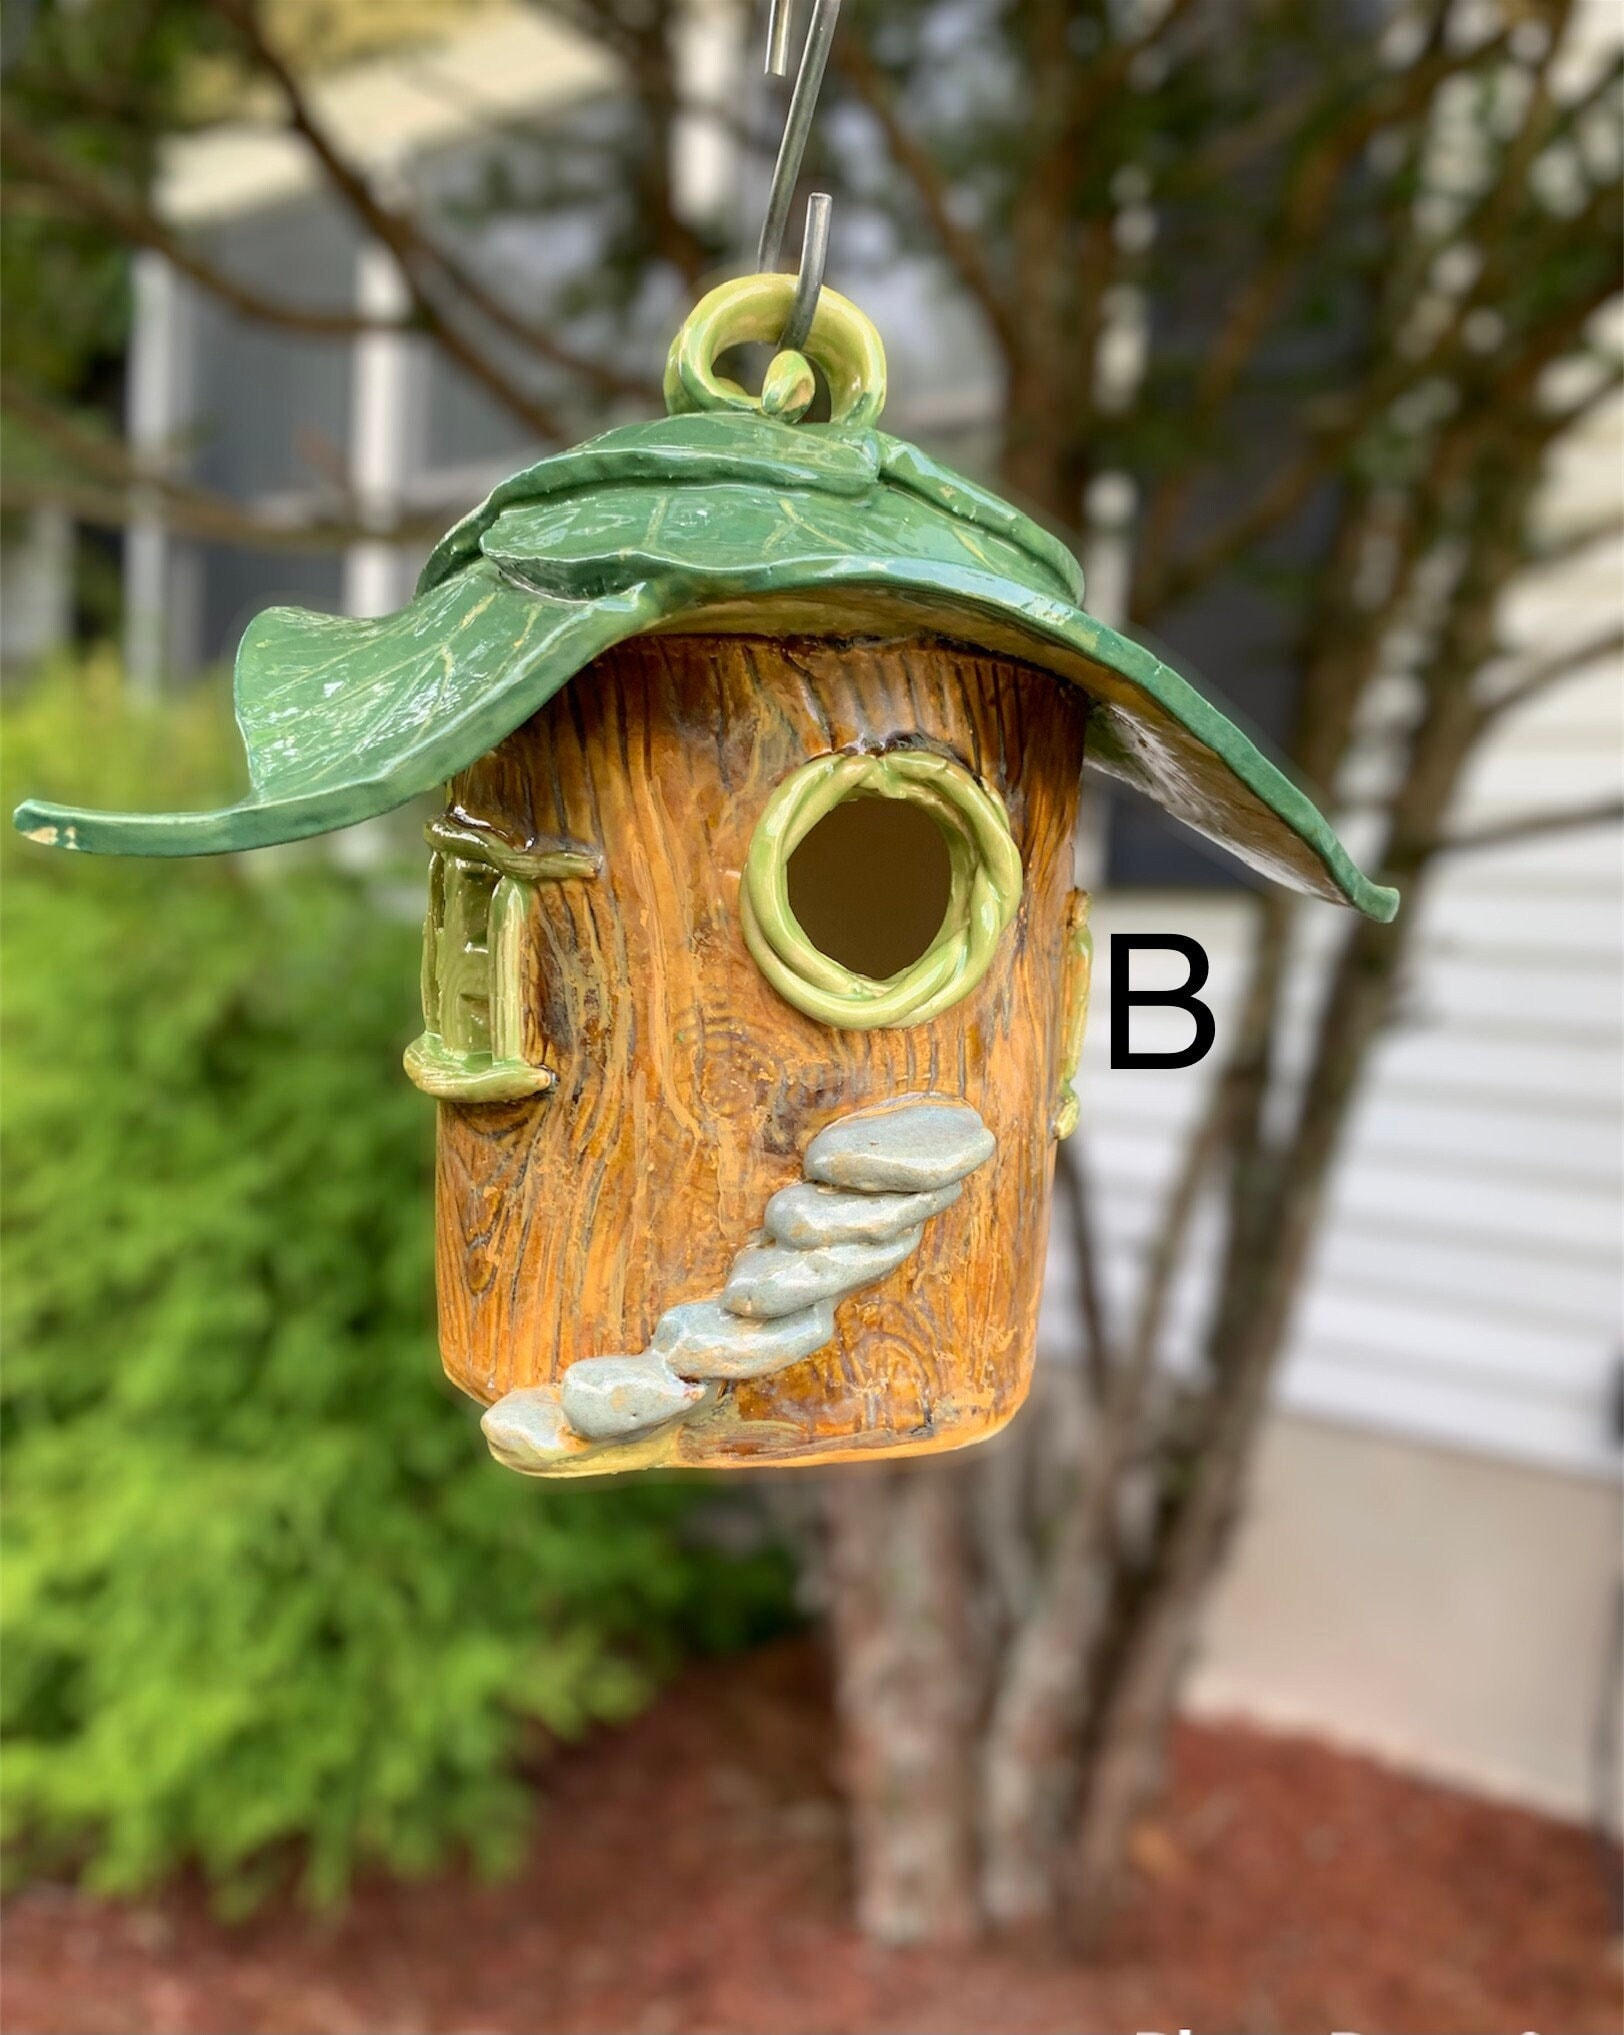 Not Afraid to Beat my kids at Video Games, Cute Fathers Day Gift –  Birdhouse Design Studio, LLC